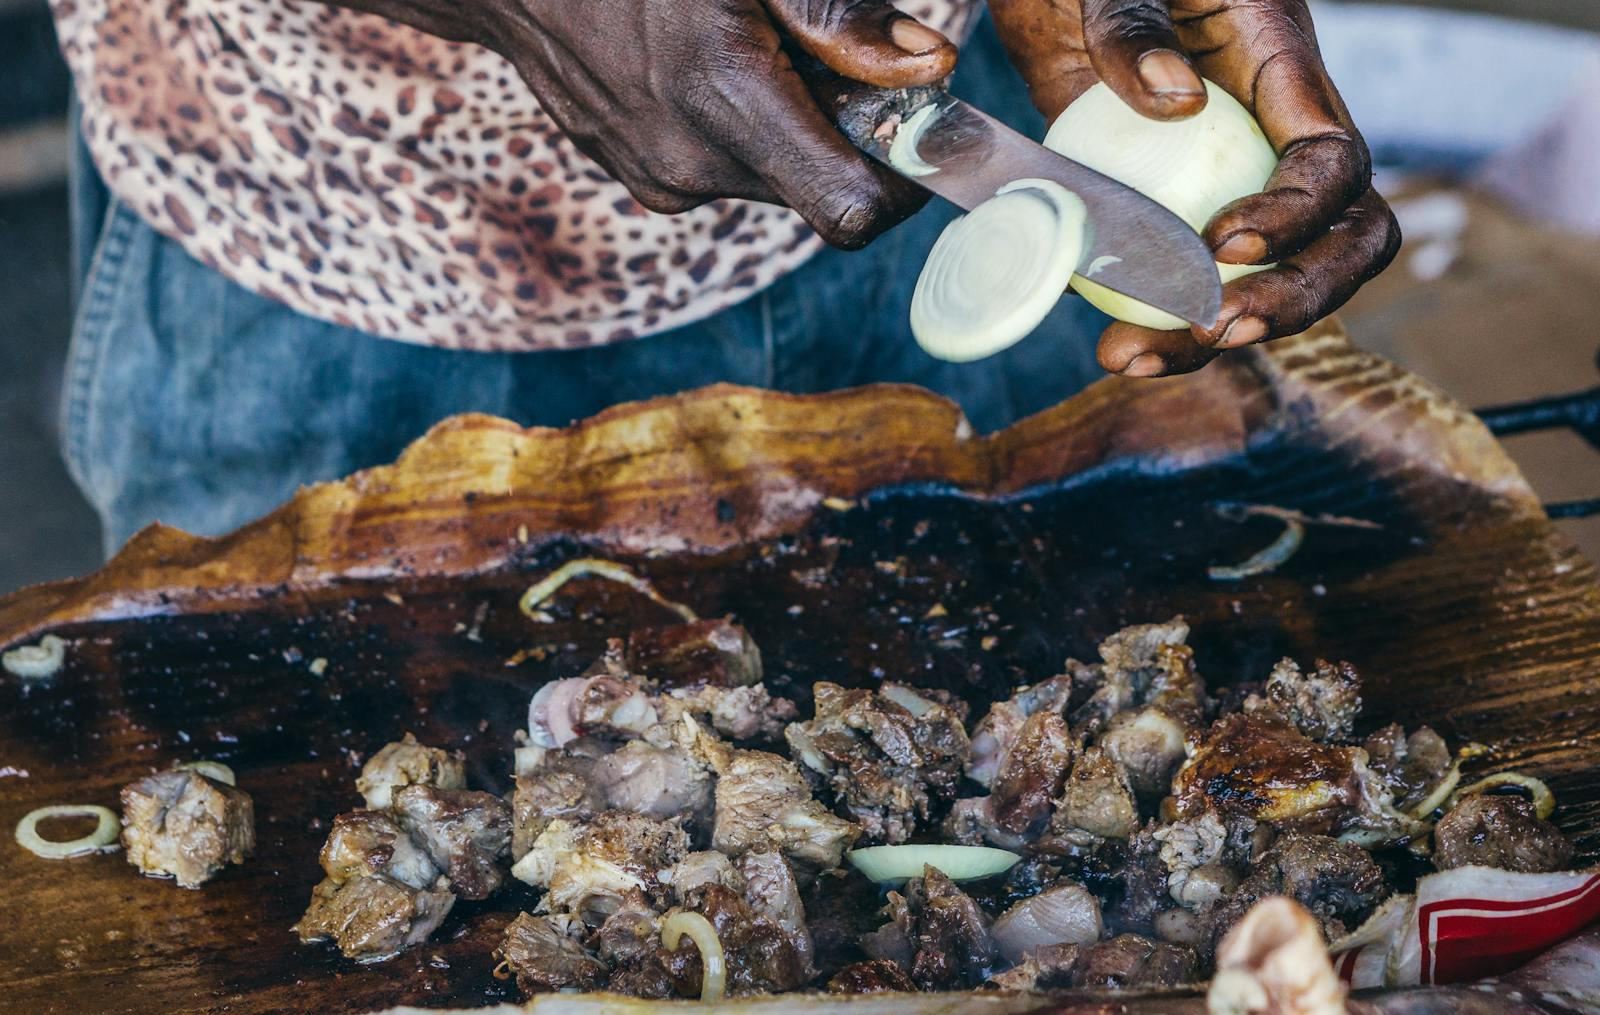 A meal being prepared in an African food truck.